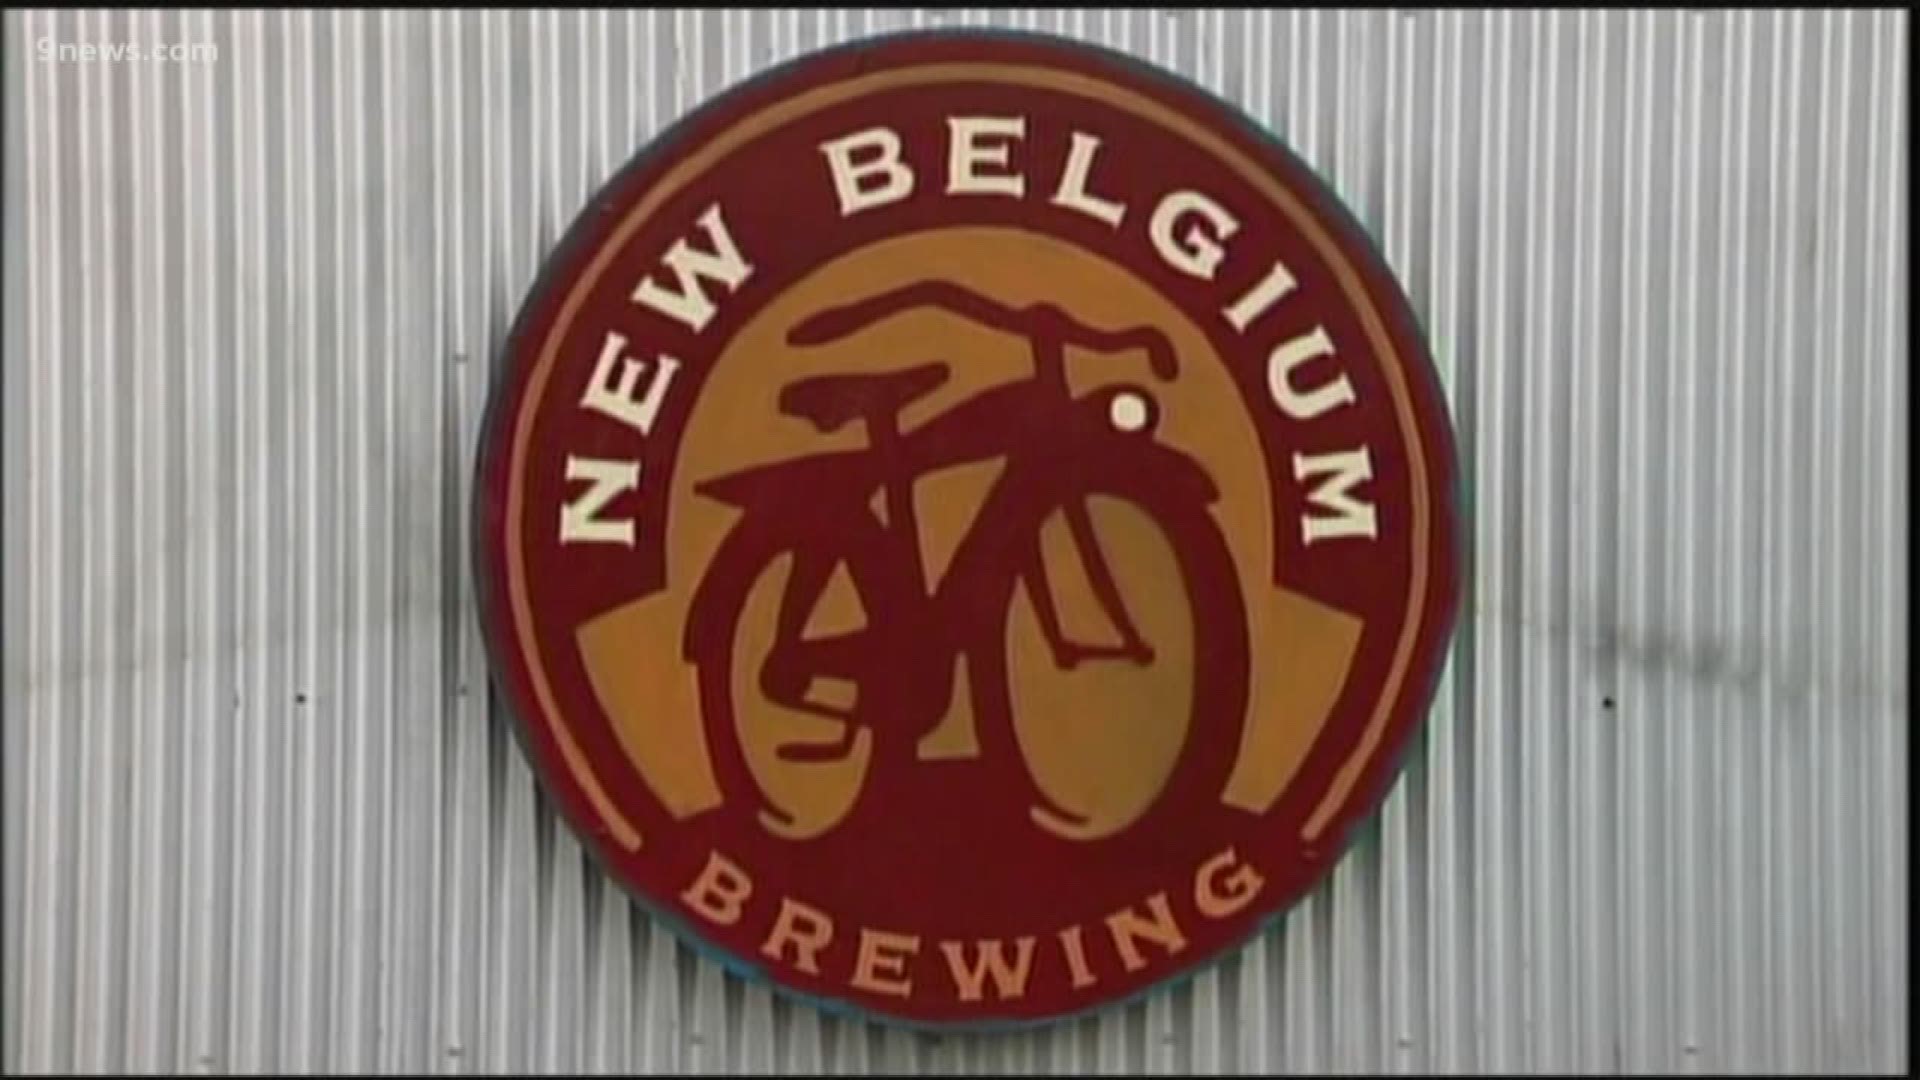 After nearly 30 years as one of Fort Collins' locally-owned, homegrown breweries, New Belgium Brewing Co. is being sold to Lion Little World Beverages.